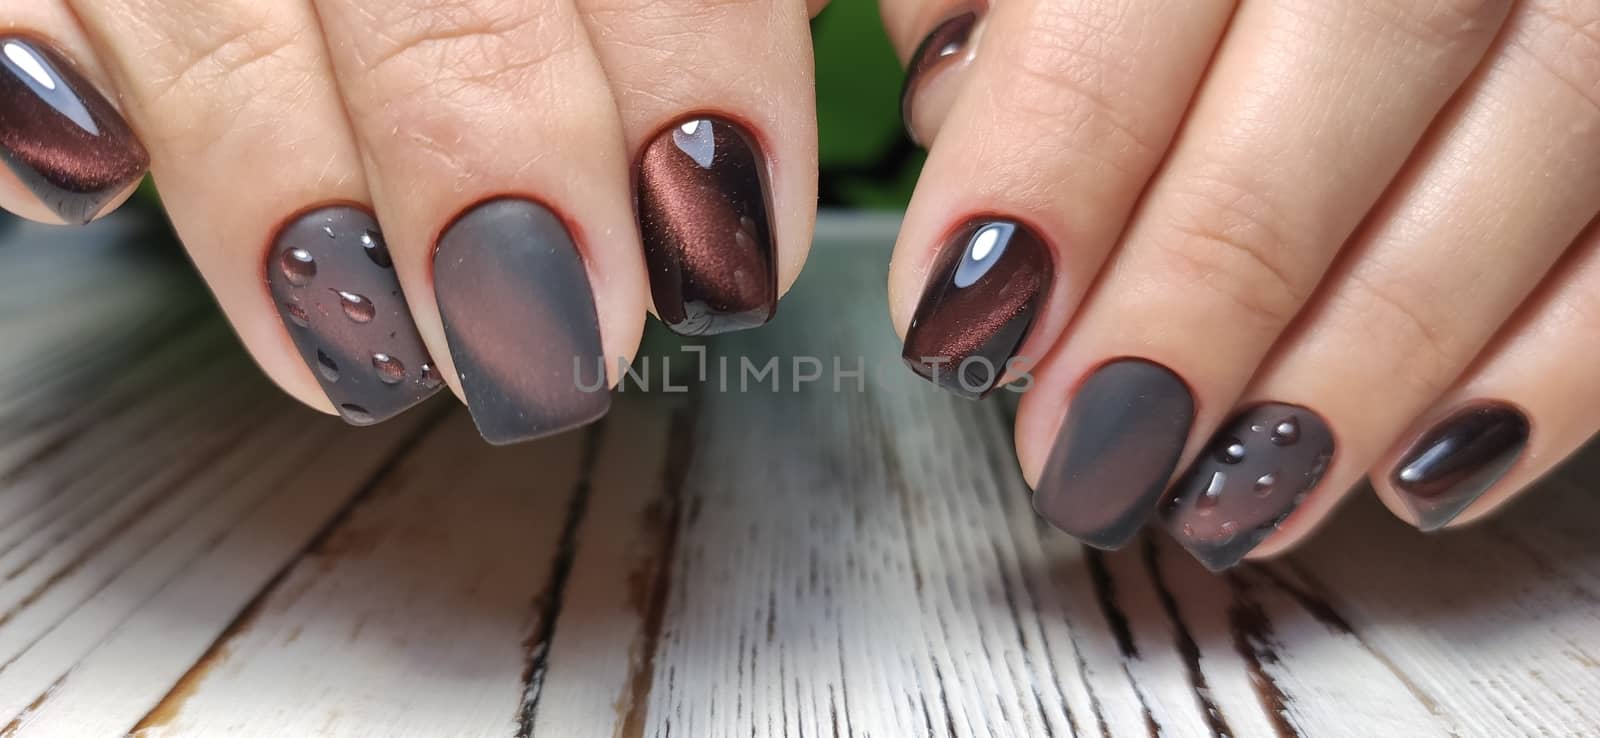 Autumn manicure. Beautyful nails design with autumn leaves. Top view. cozy autumn image.